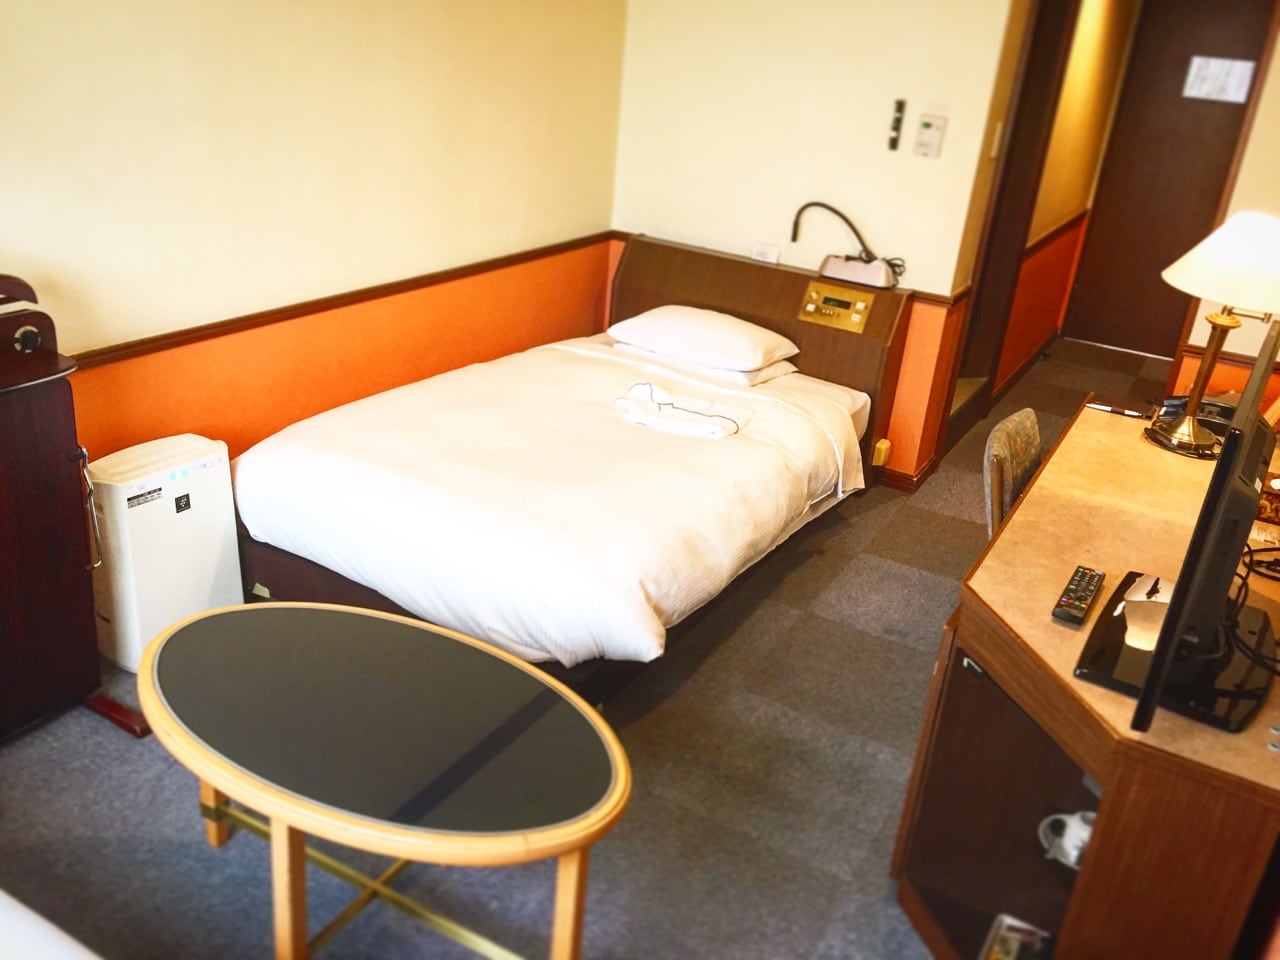 Single room 20㎡ ~ We have made it a spacious room so that you can relax slowly.